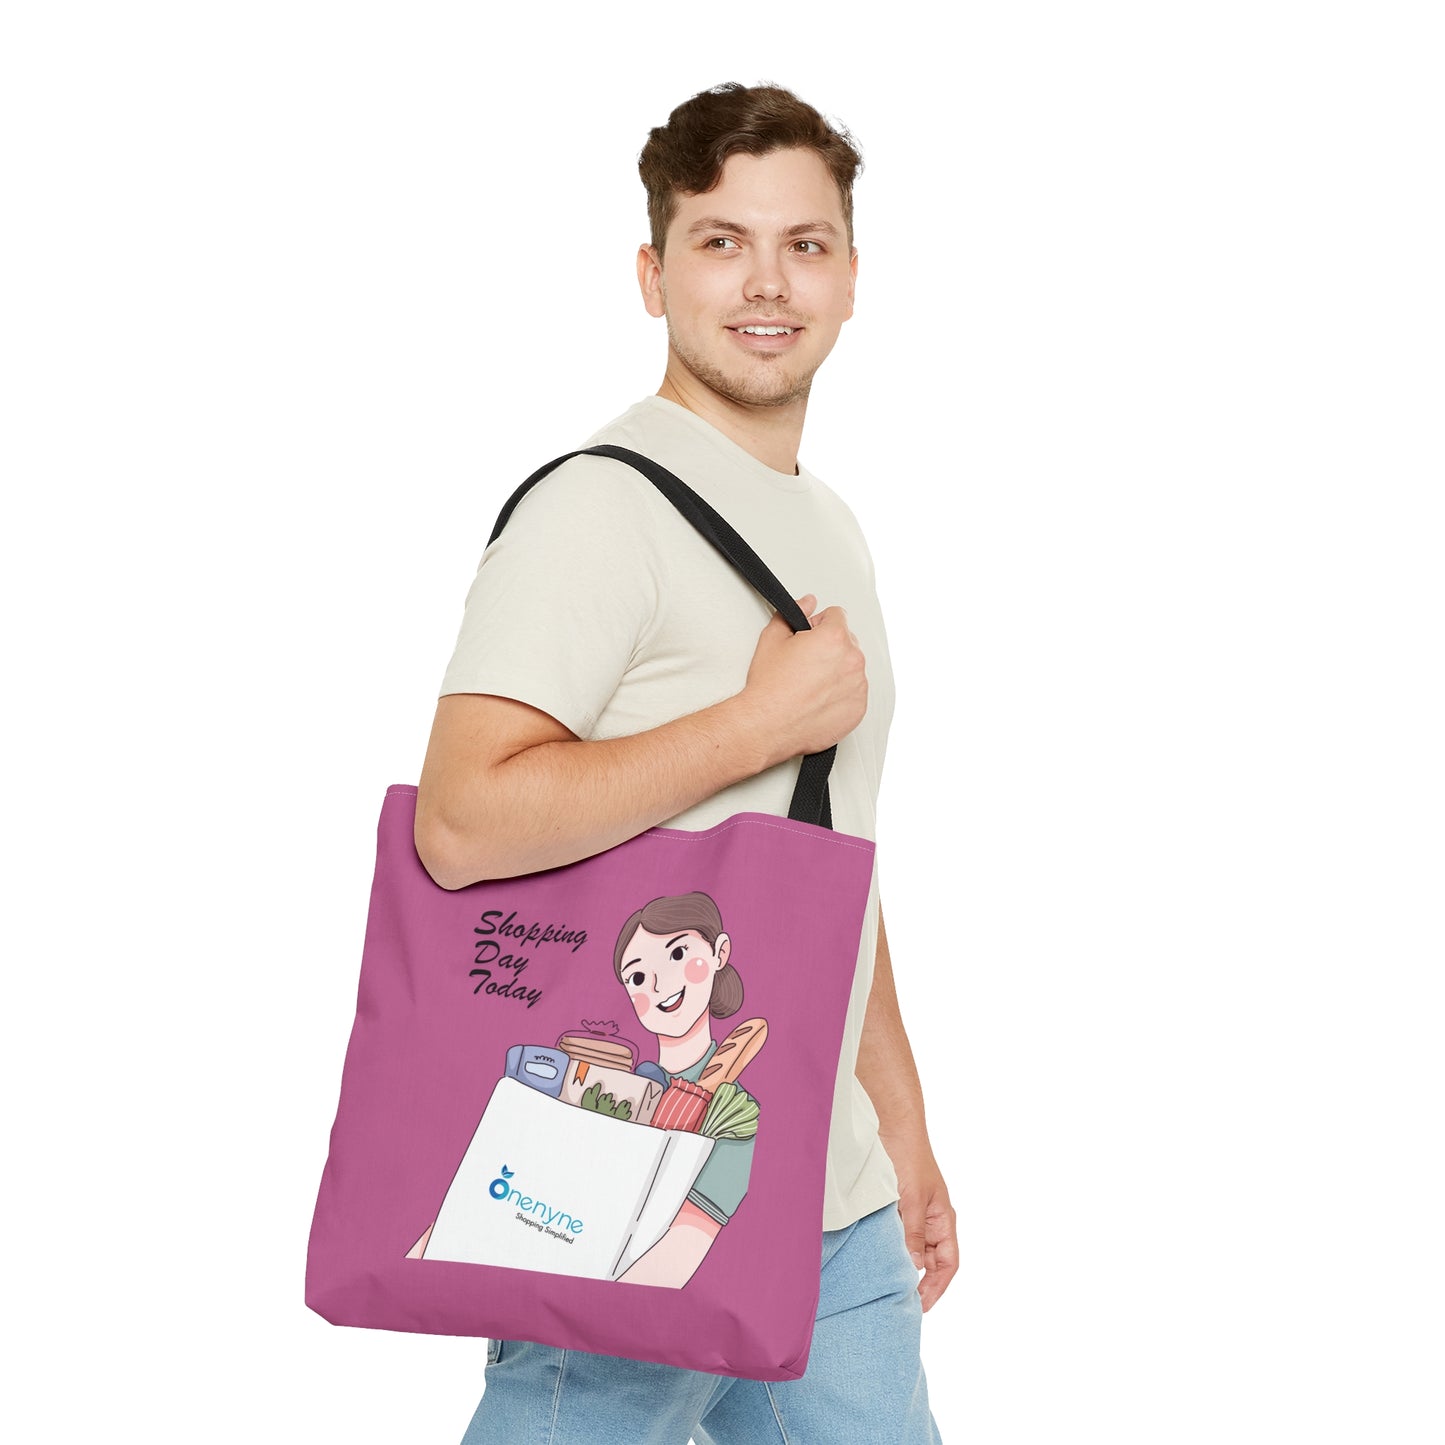 Shopping Day Tote Bag